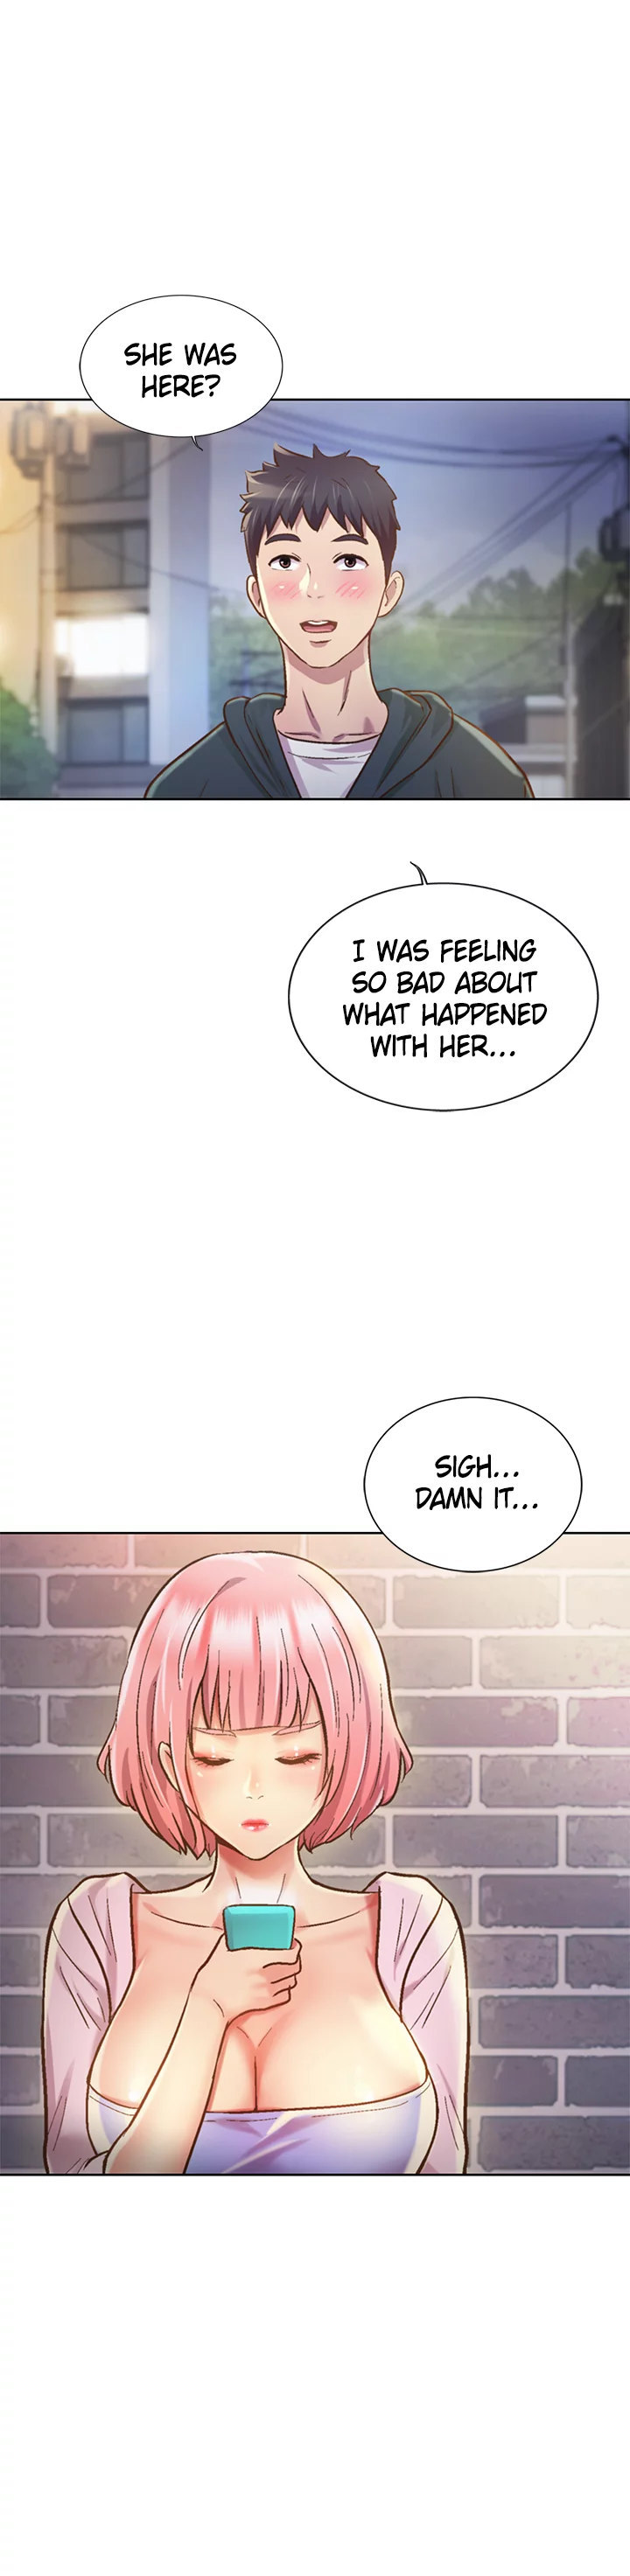 Noona’s Taste - Chapter 8 Page 4